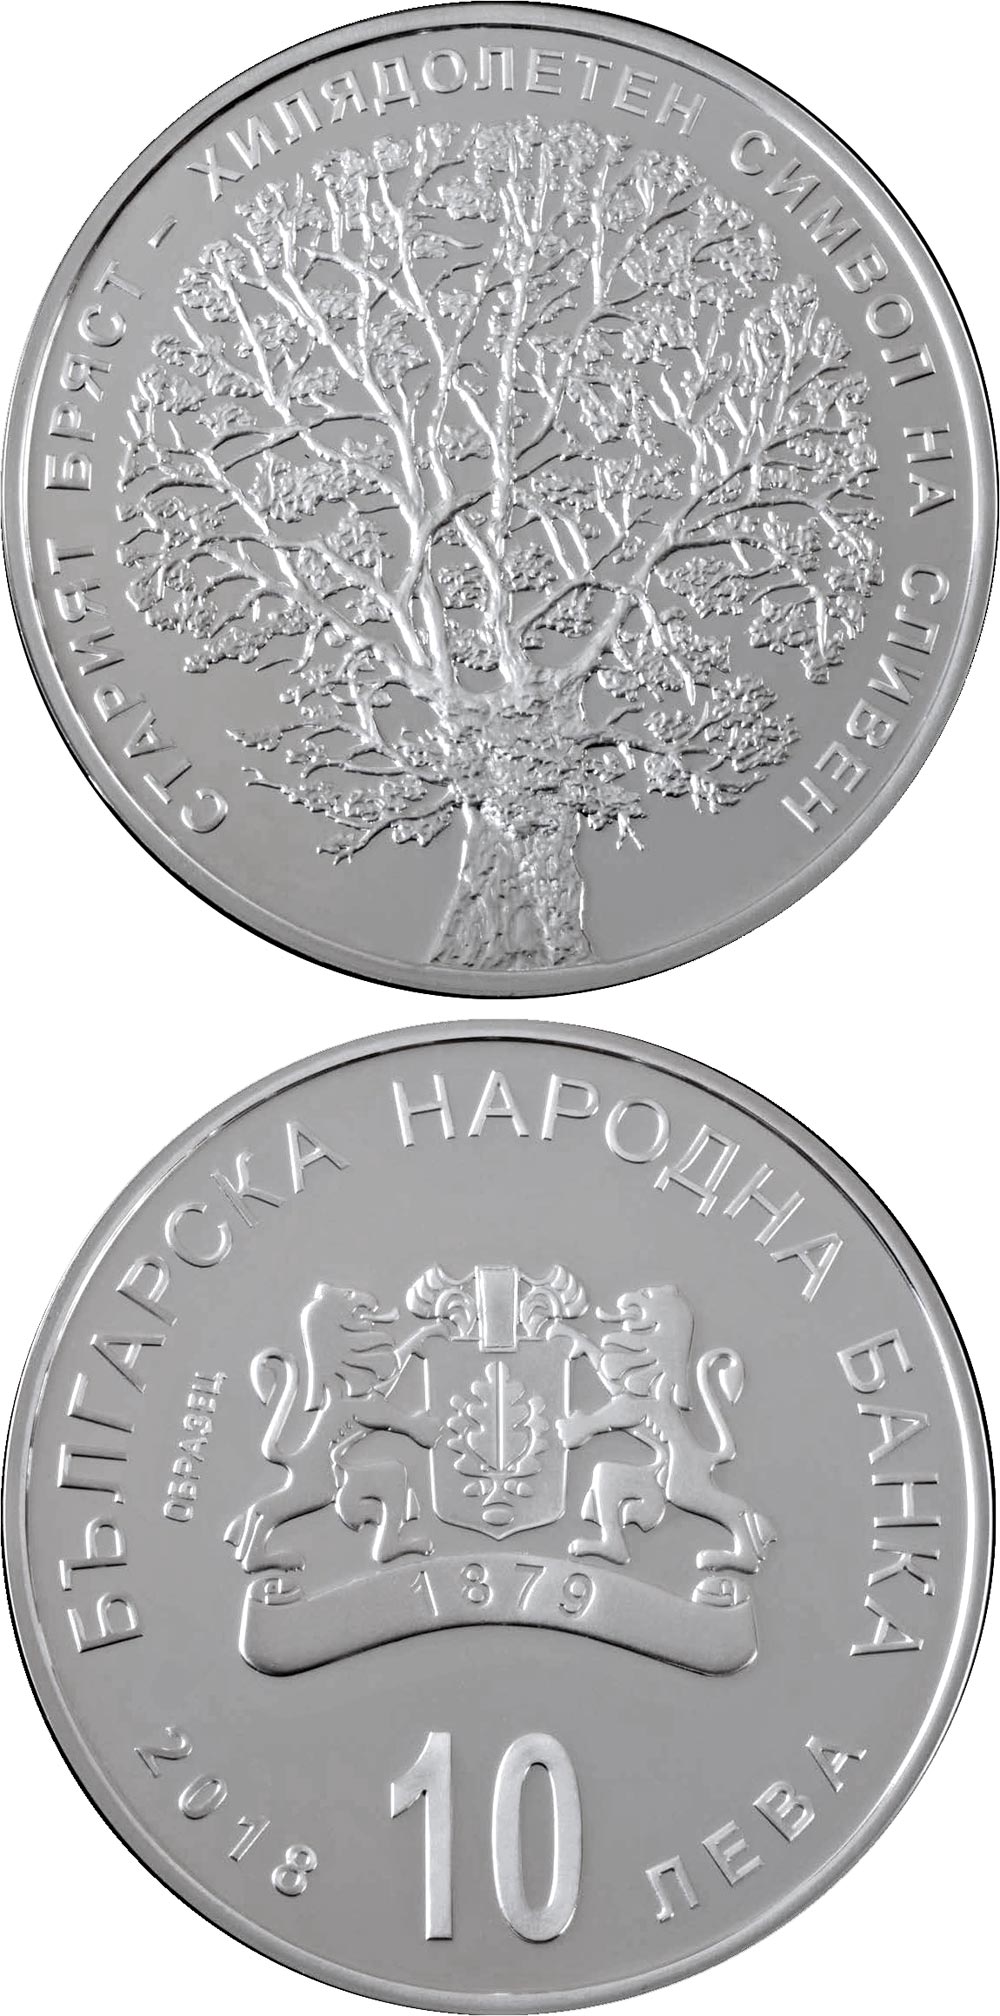 Image of 10 lev  coin - The Old Elm Tree in Sliven | Bulgaria 2018.  The Silver coin is of Proof quality.